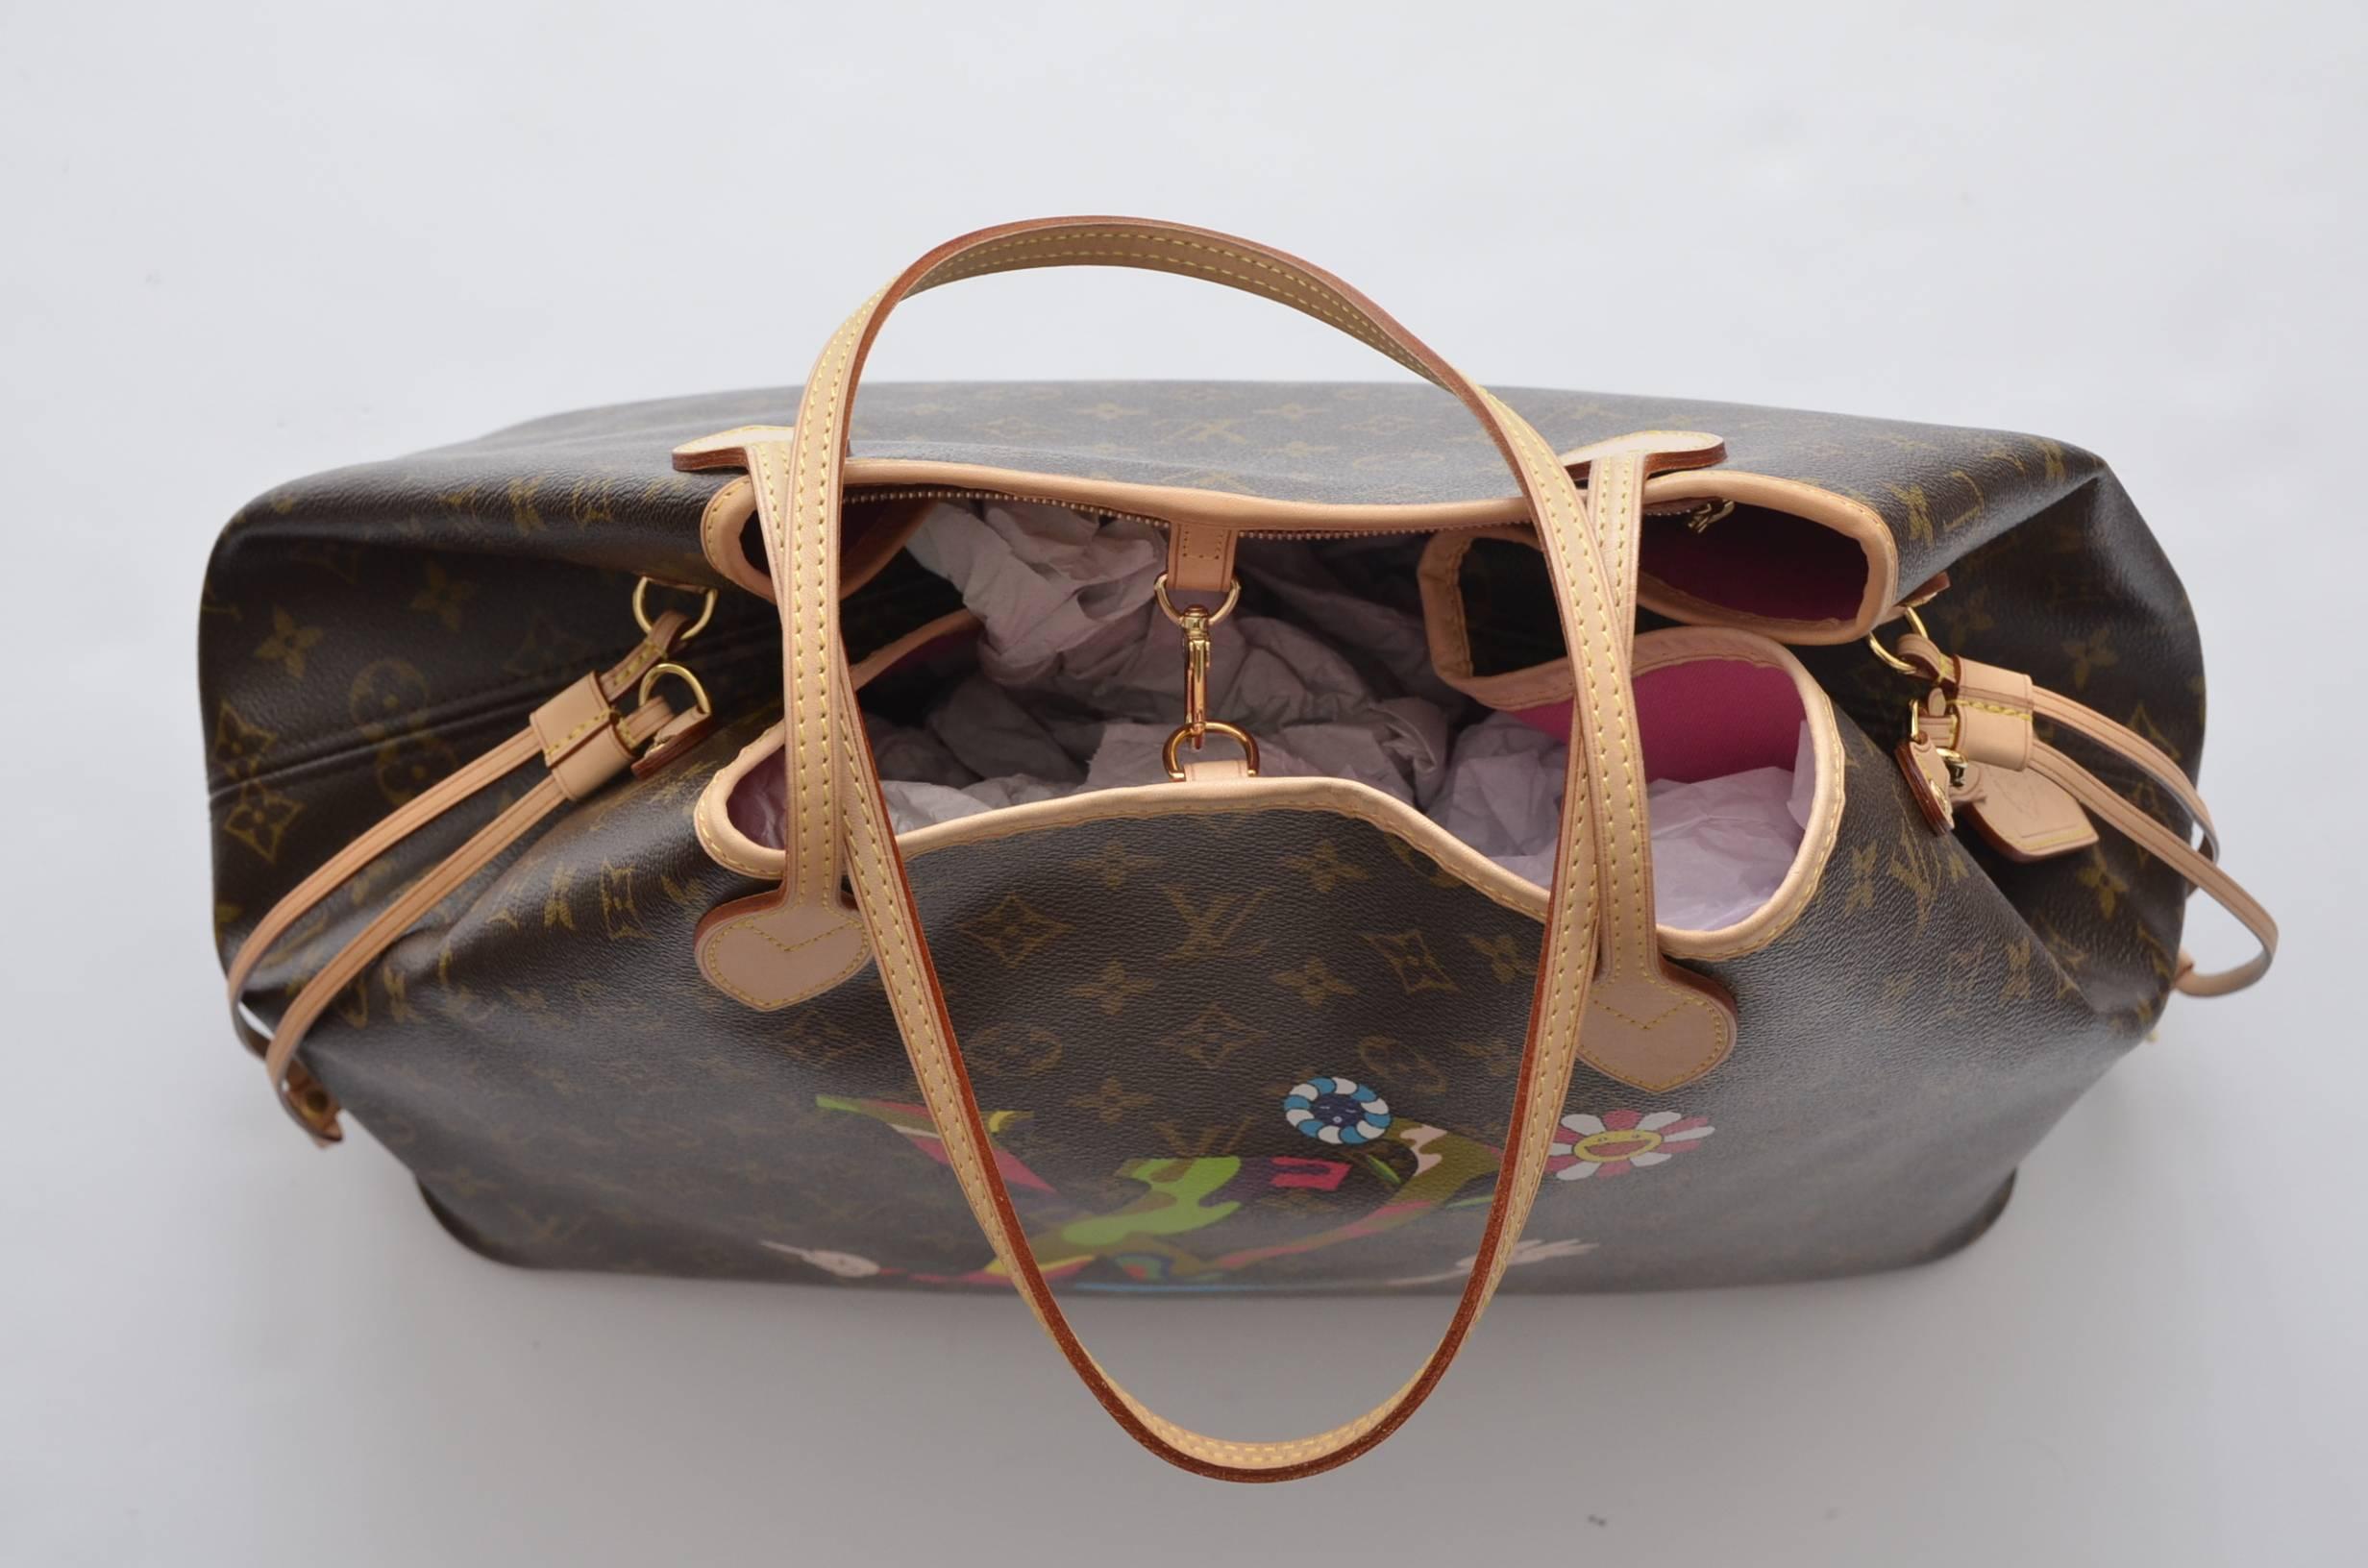 Limited Edition LOUIS VUITTON Monogram LV Hands Moca Neverfull PM. Features the colorful 